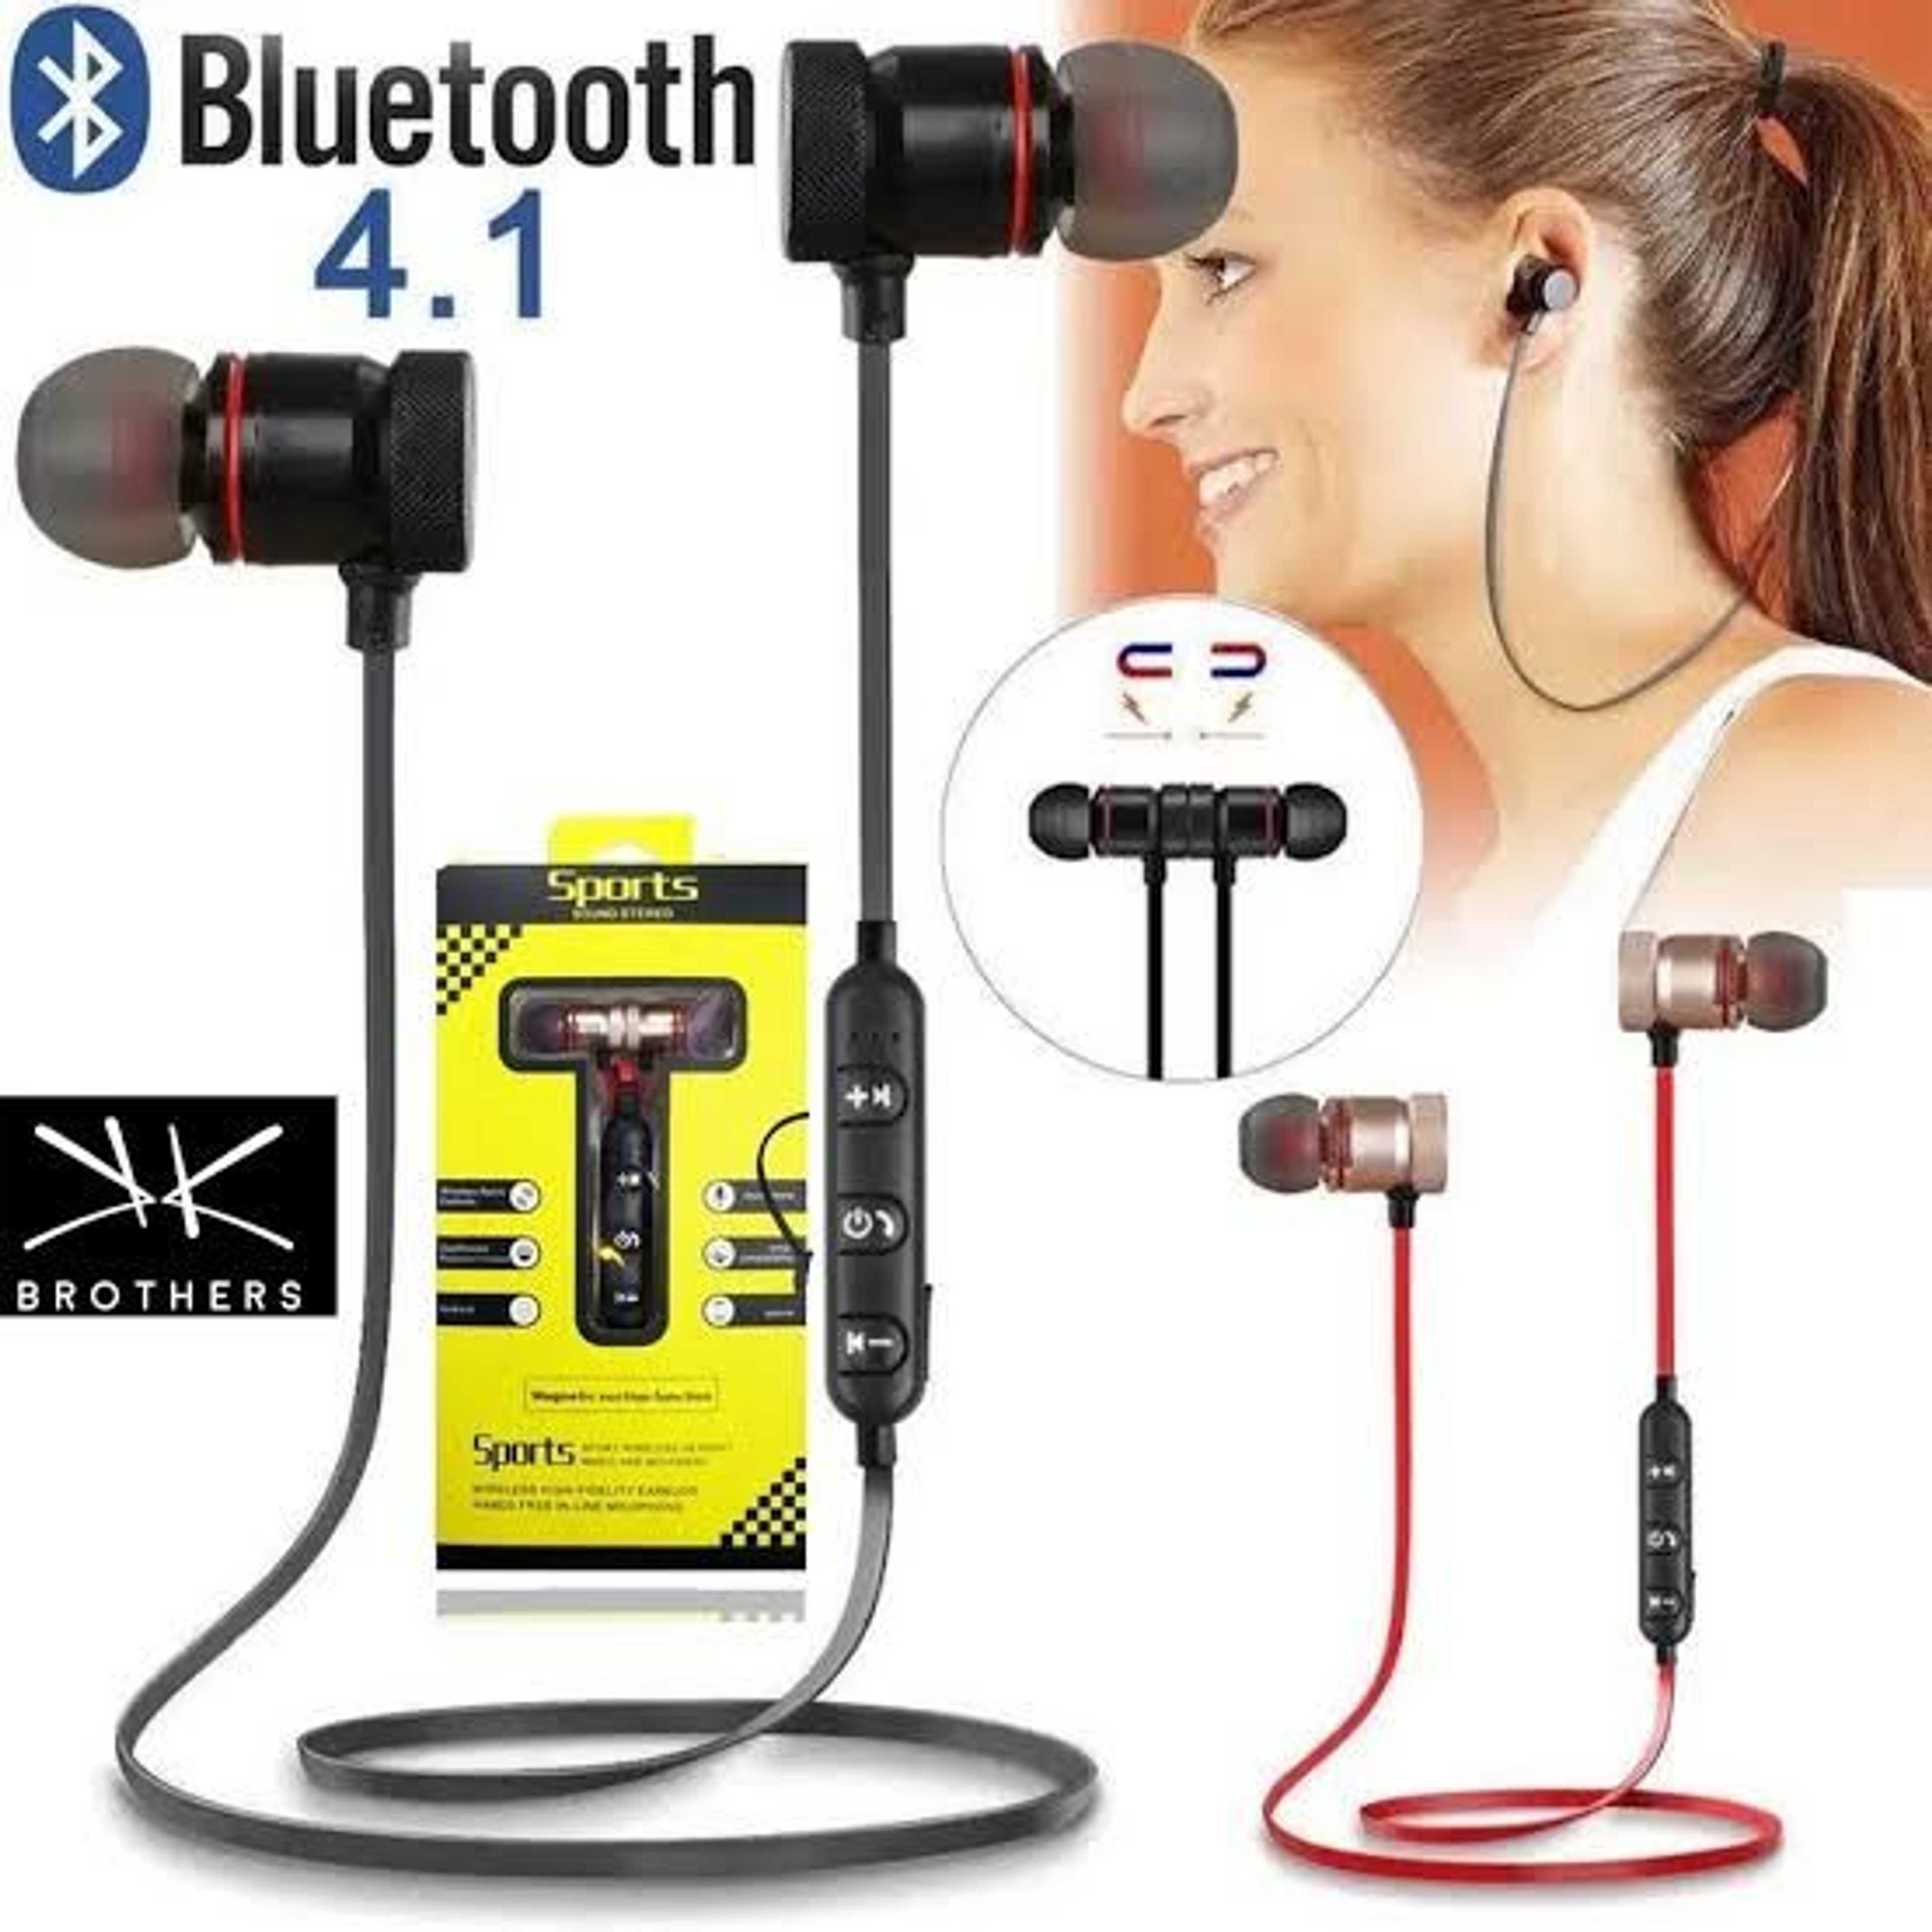 Sports Bluetooth Handfree High Quality Sound With Calling Mic Stereo